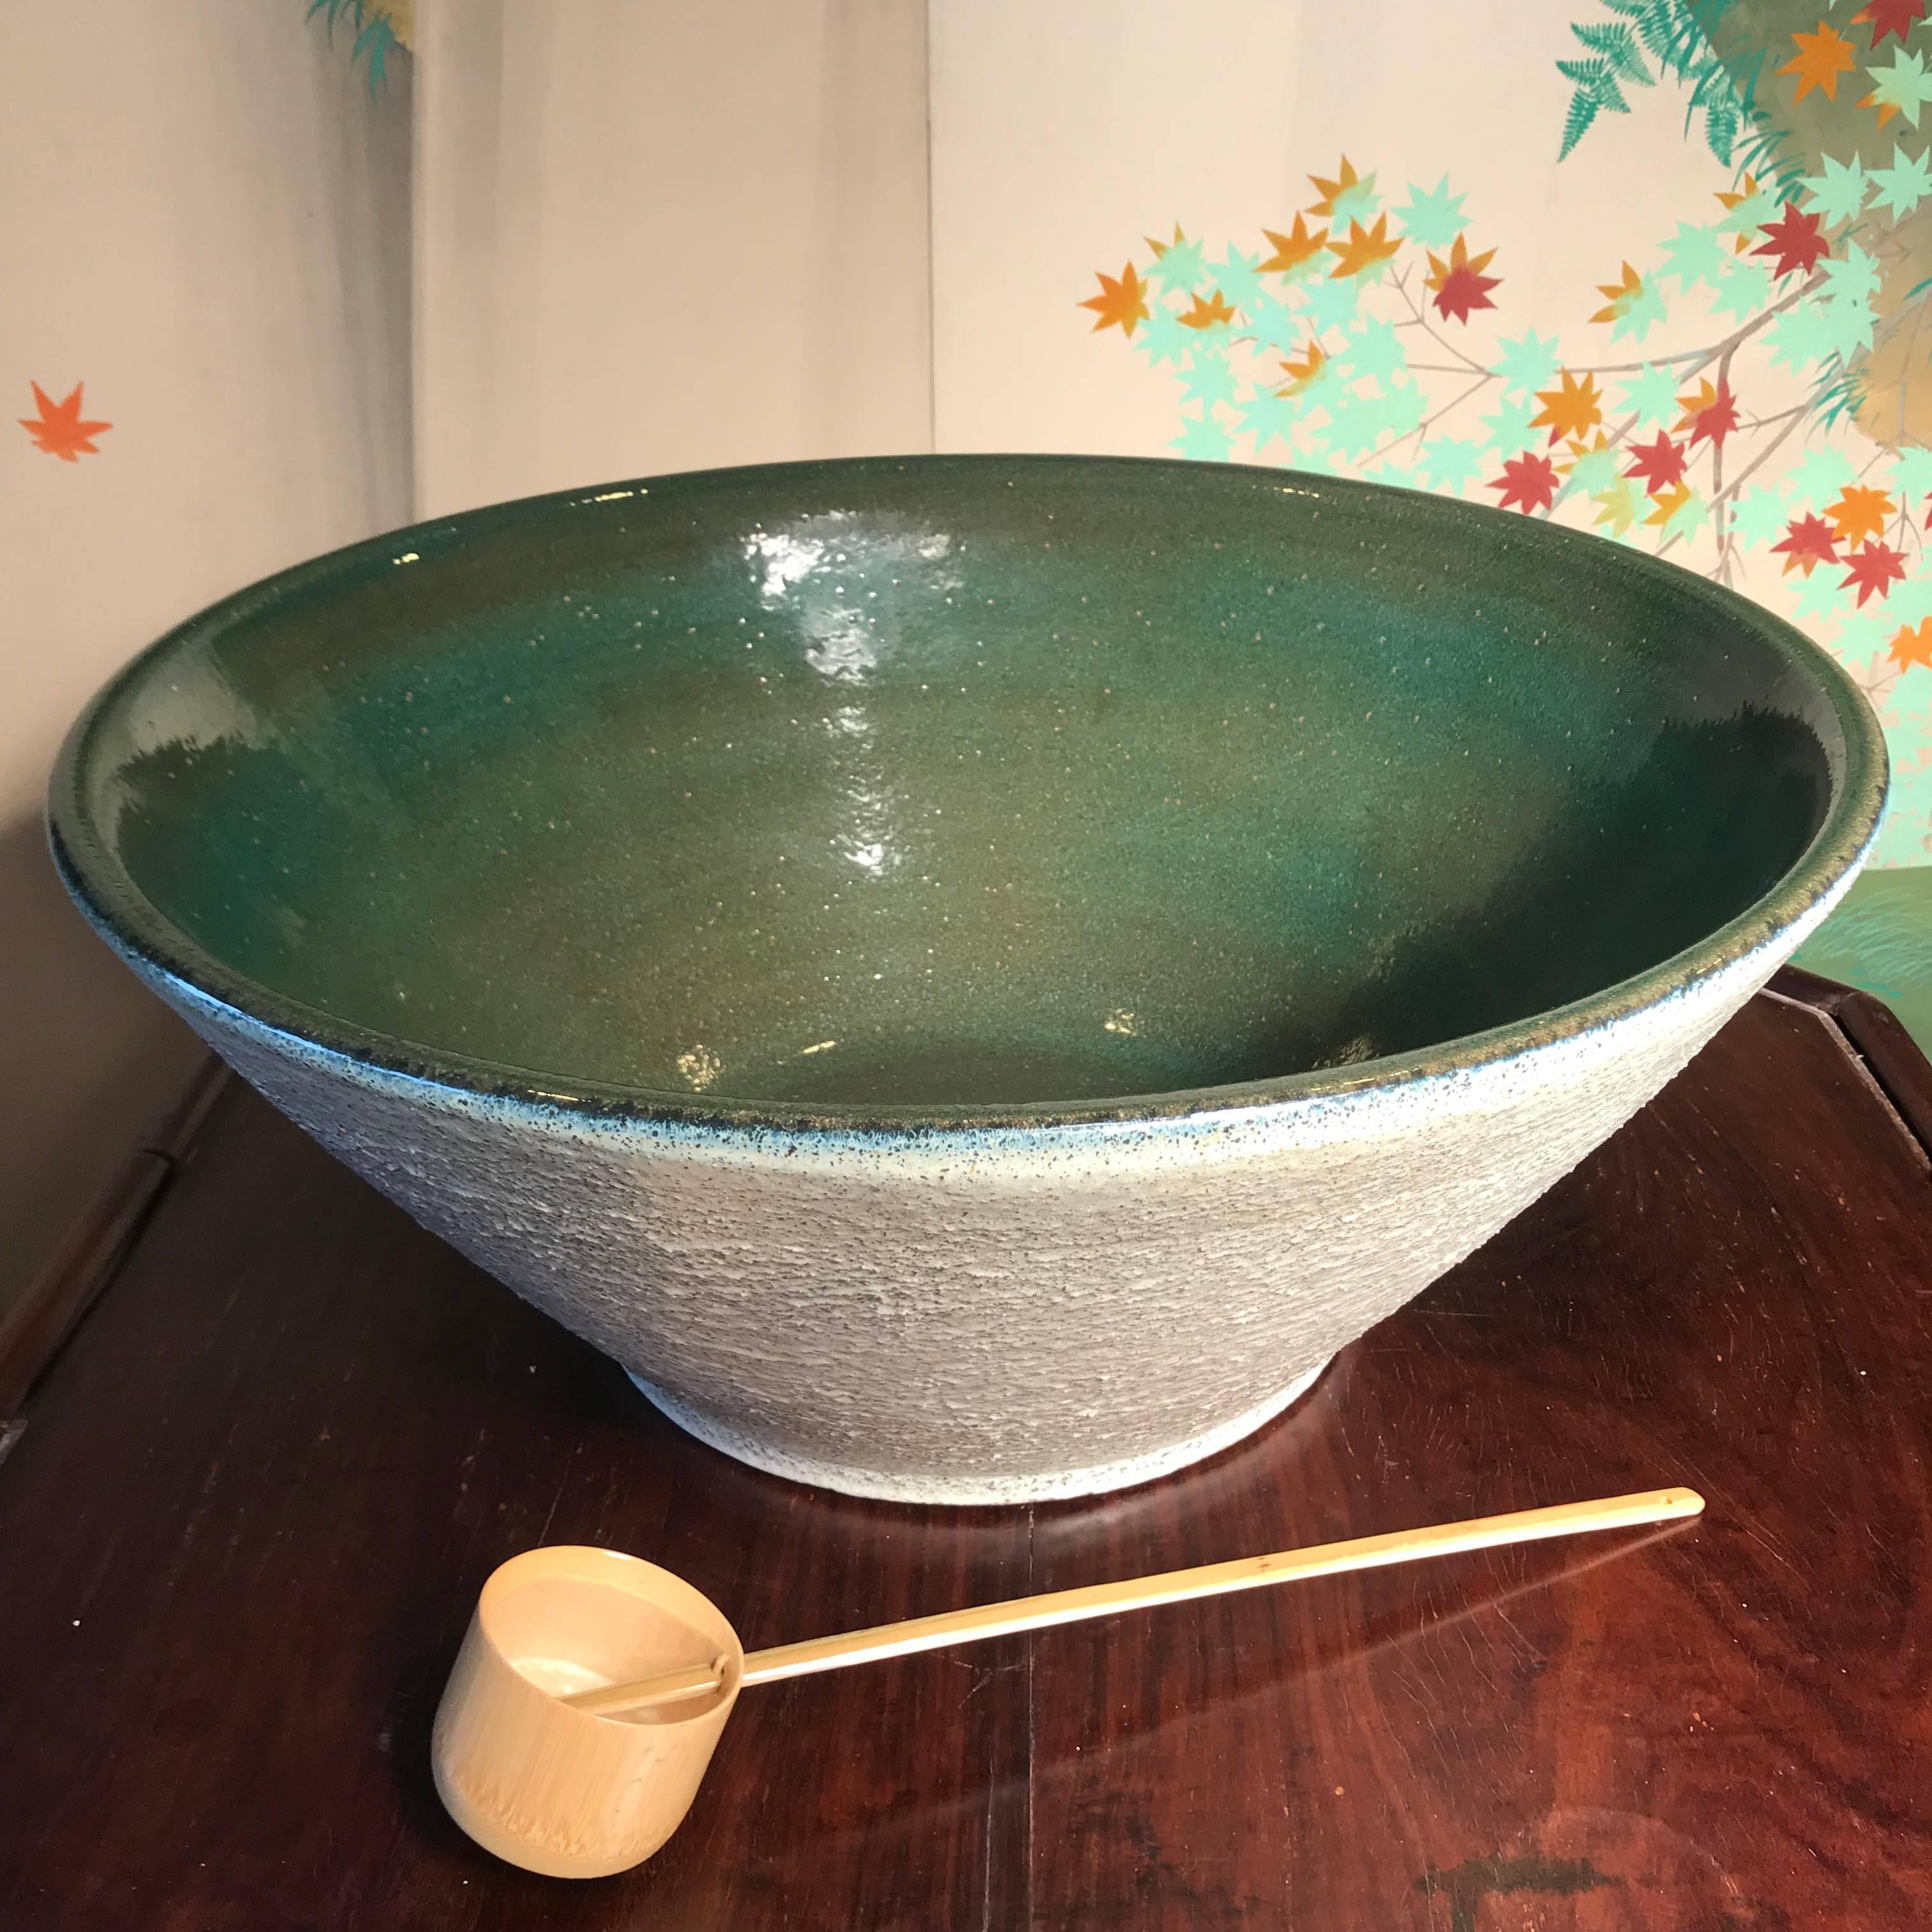 Japan, an attractive and  large one-of-a-kind  hand thrown and hand glazed green and cream colored stoneware bowl vessel mizubachi. Thick and creamy glazing like only Japanese artisans master.

We will also include a complimentary Japanese made